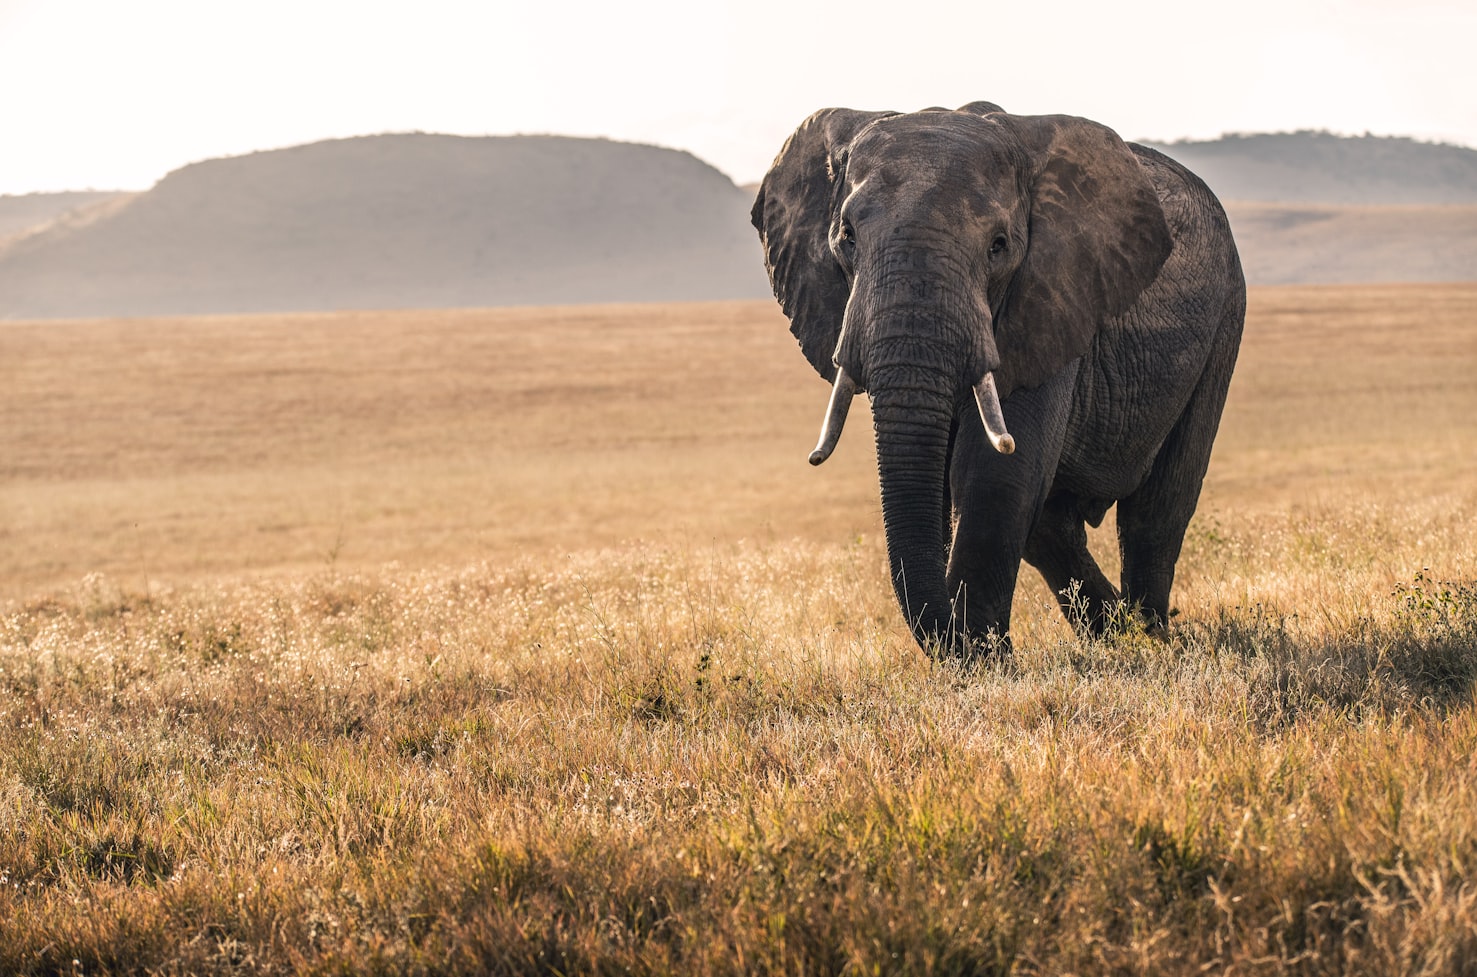 The African Elephant: The animal with the longest pregnancy